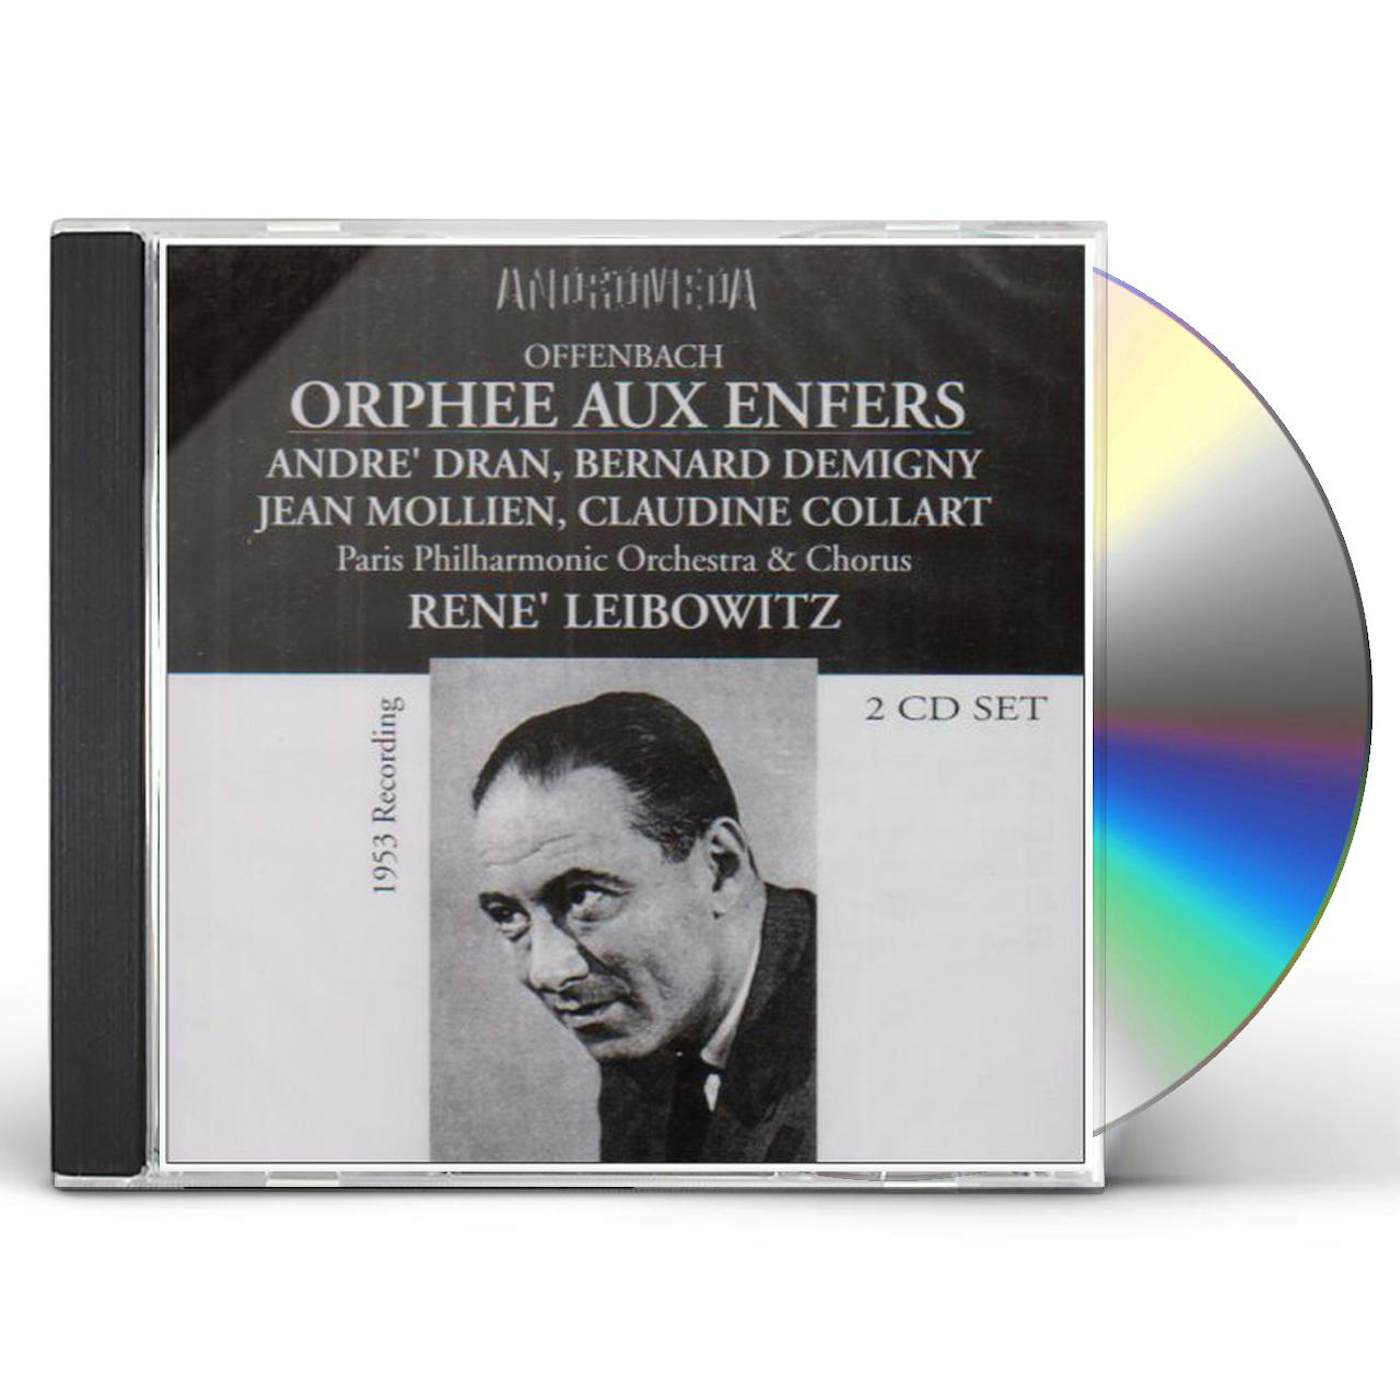 Offenbach ORPHEE AUX ENFERS CD